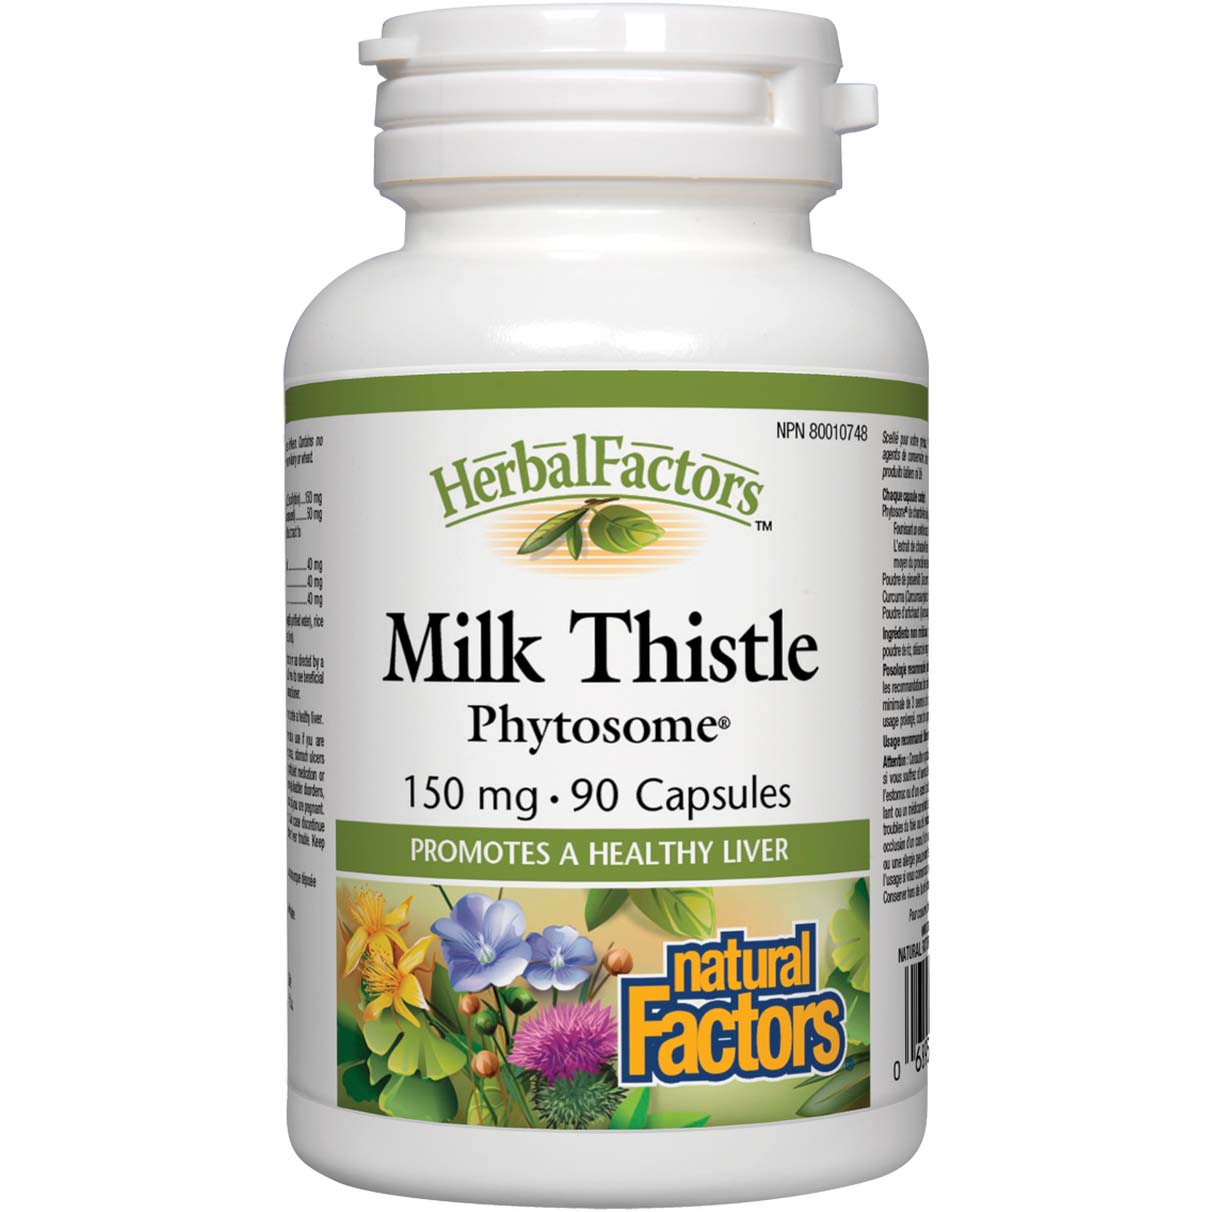 Natural Factors Milk Thistle Phytosome, 150 mg, 90 Capsules